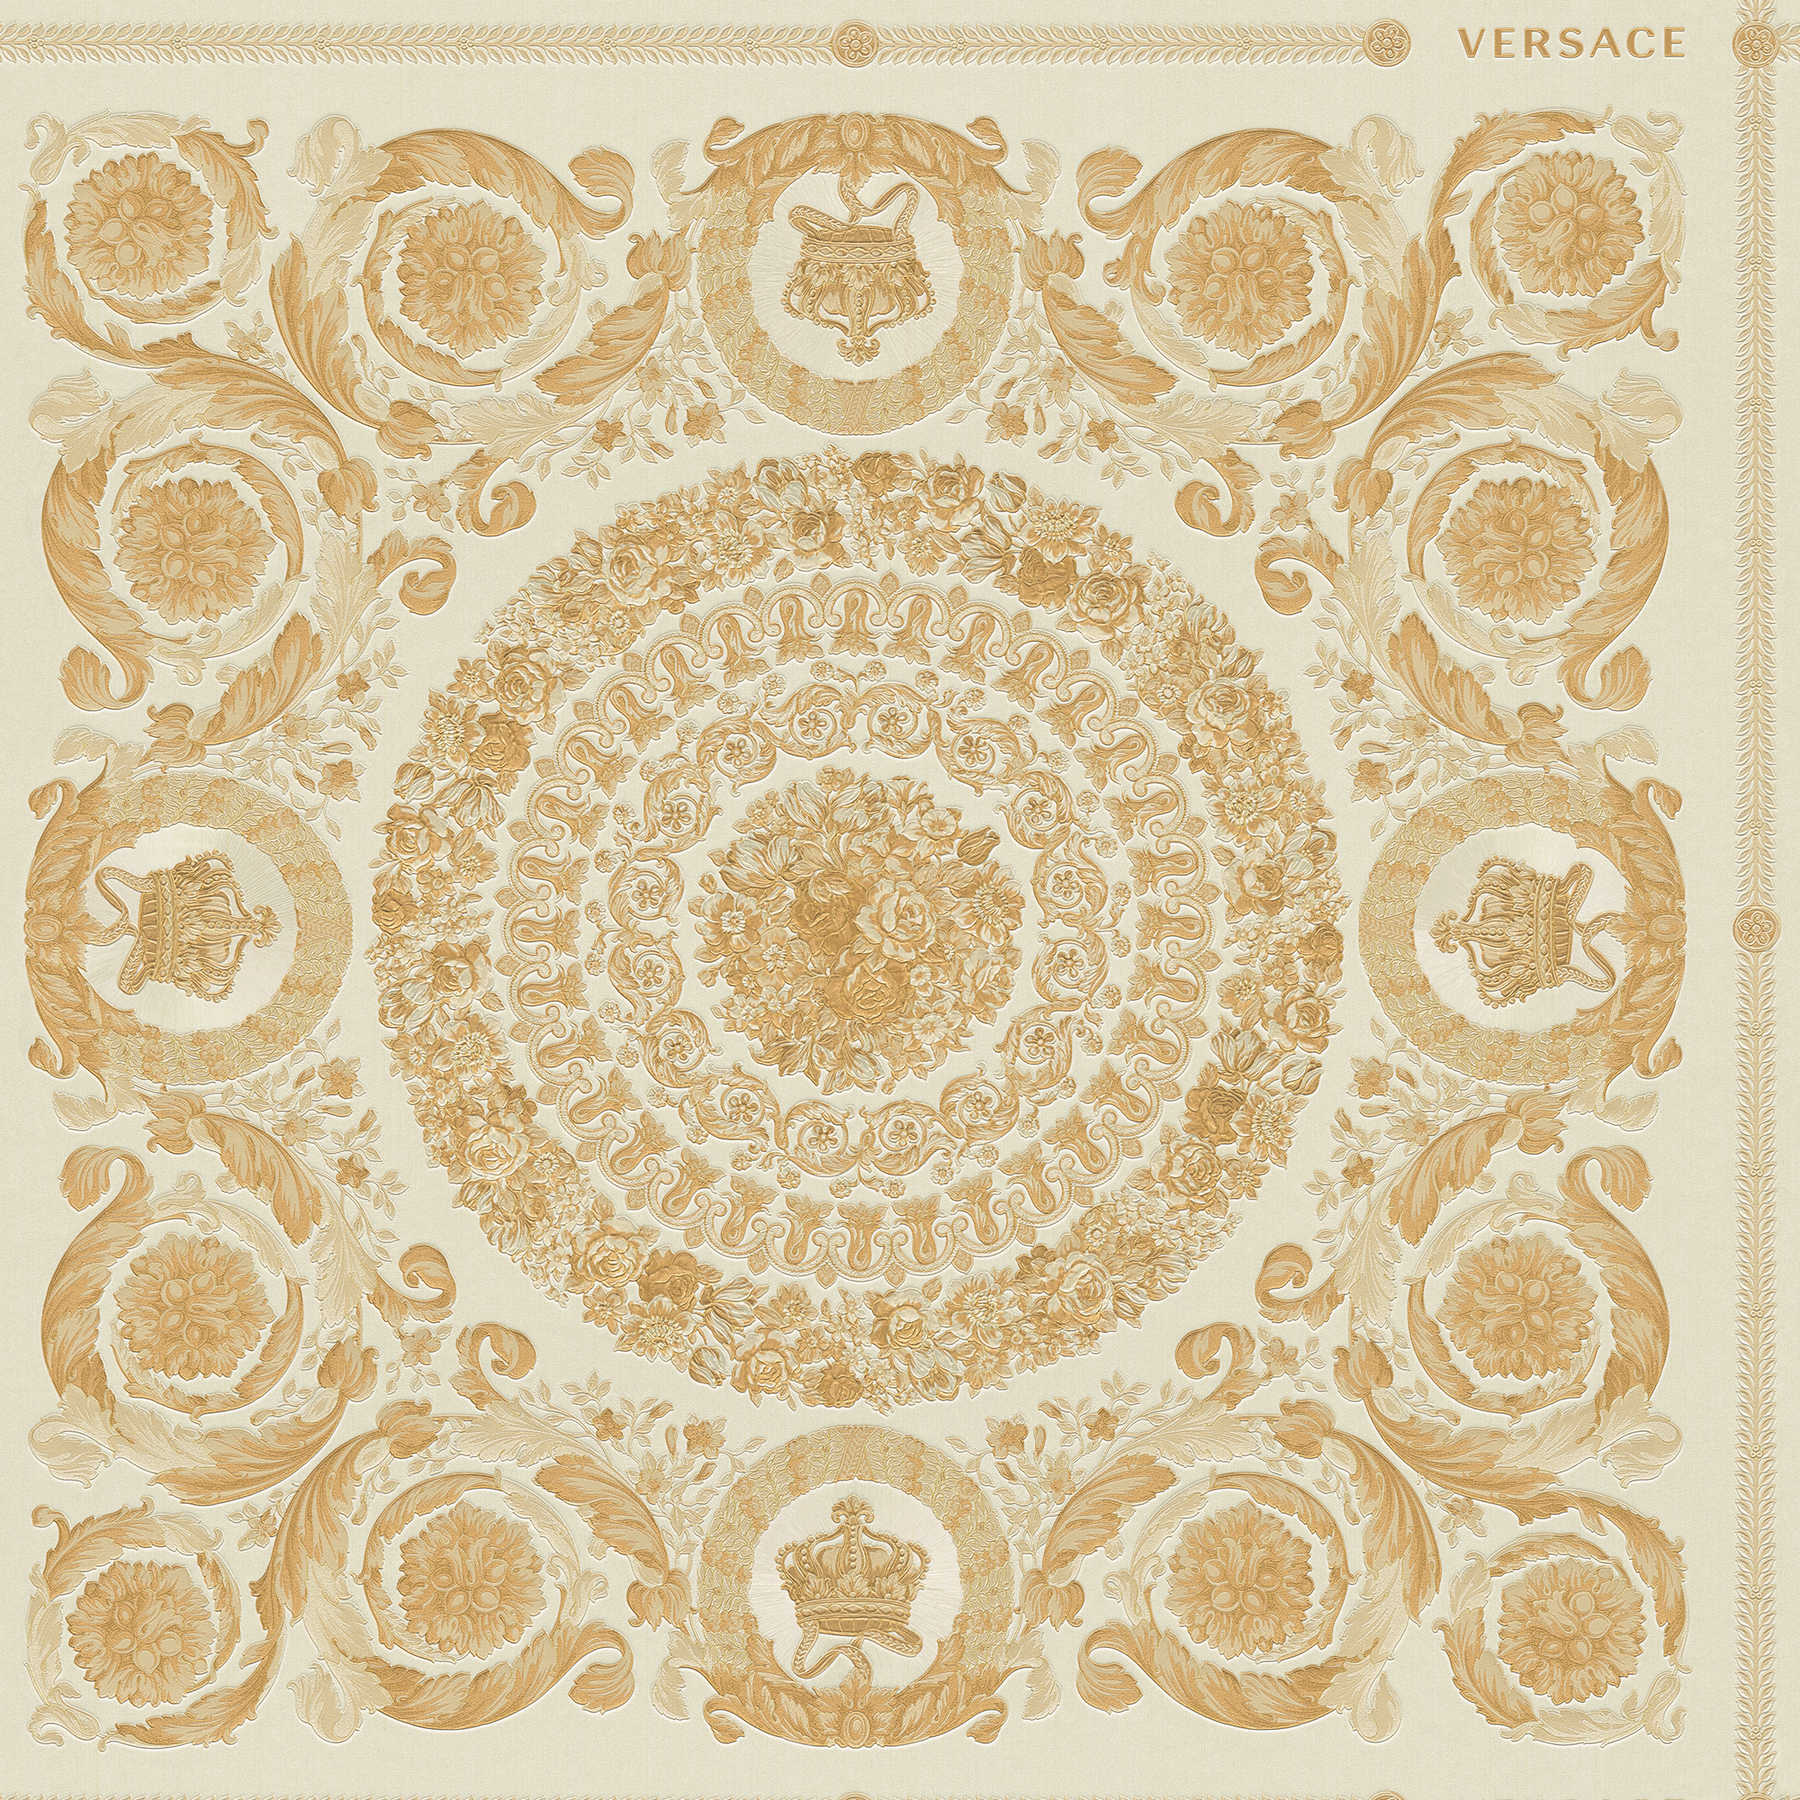 Luxury VERSACE Home wallpaper crowns & roses - gold, white, cream
